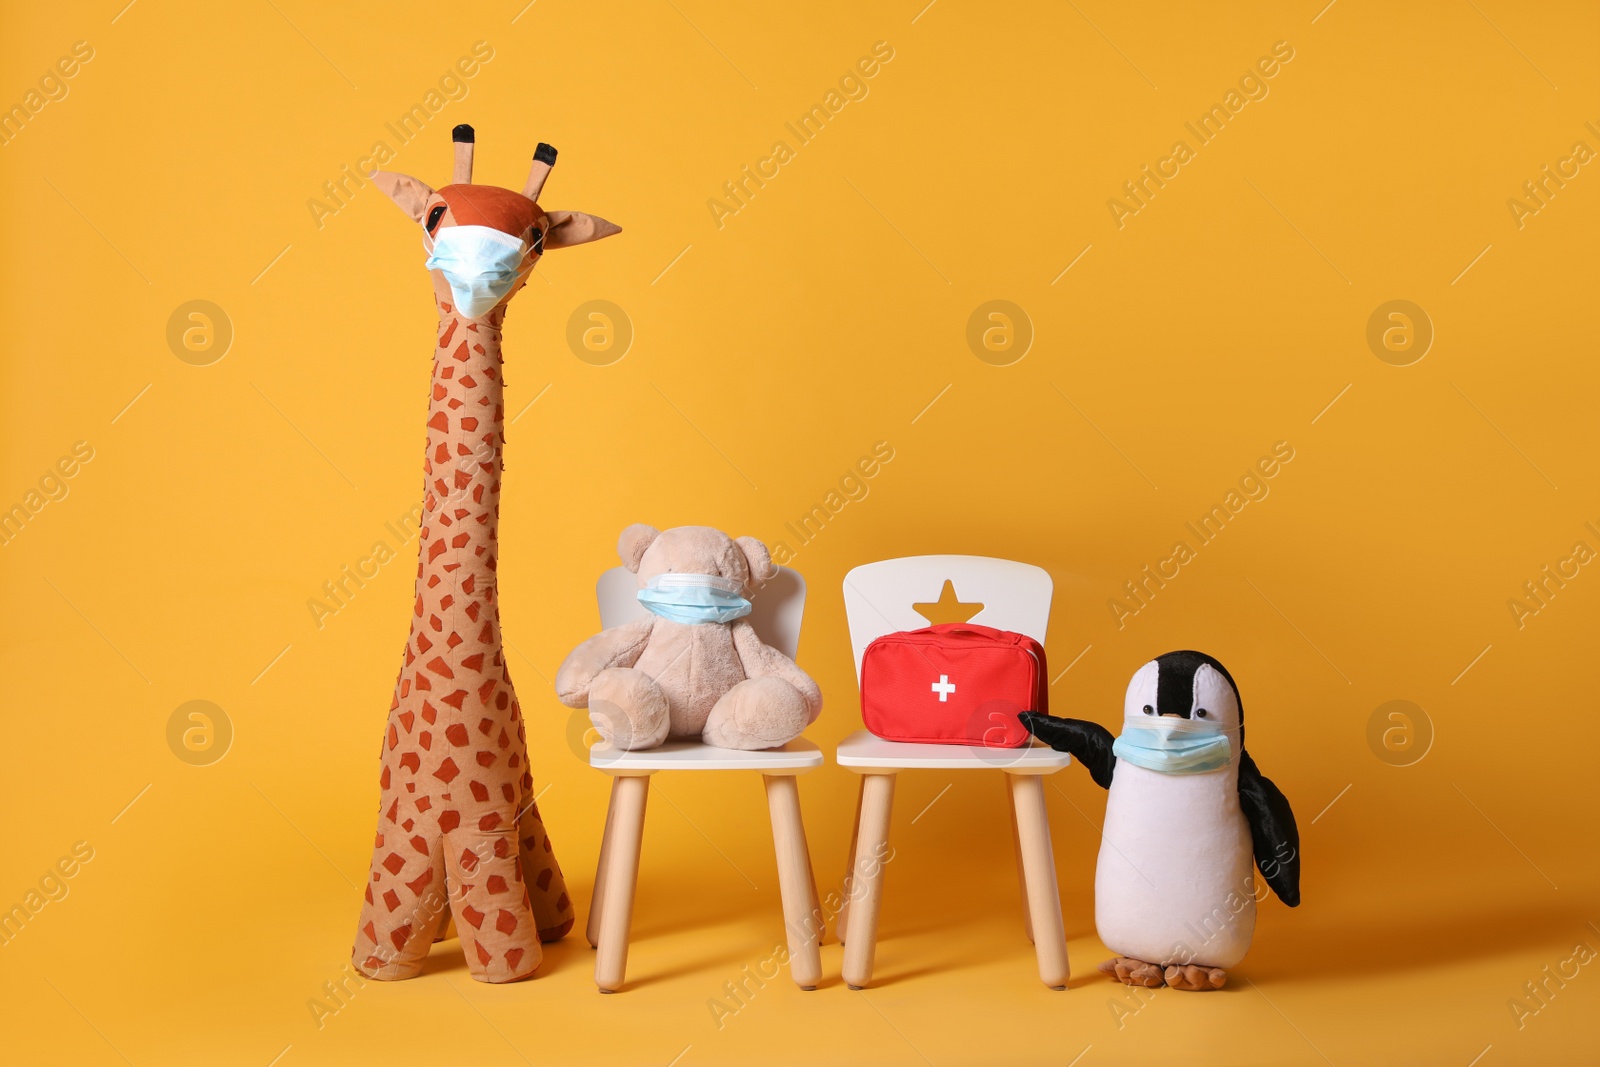 Photo of Toys with face masks and first aid bag on yellow background. Pediatrician practice